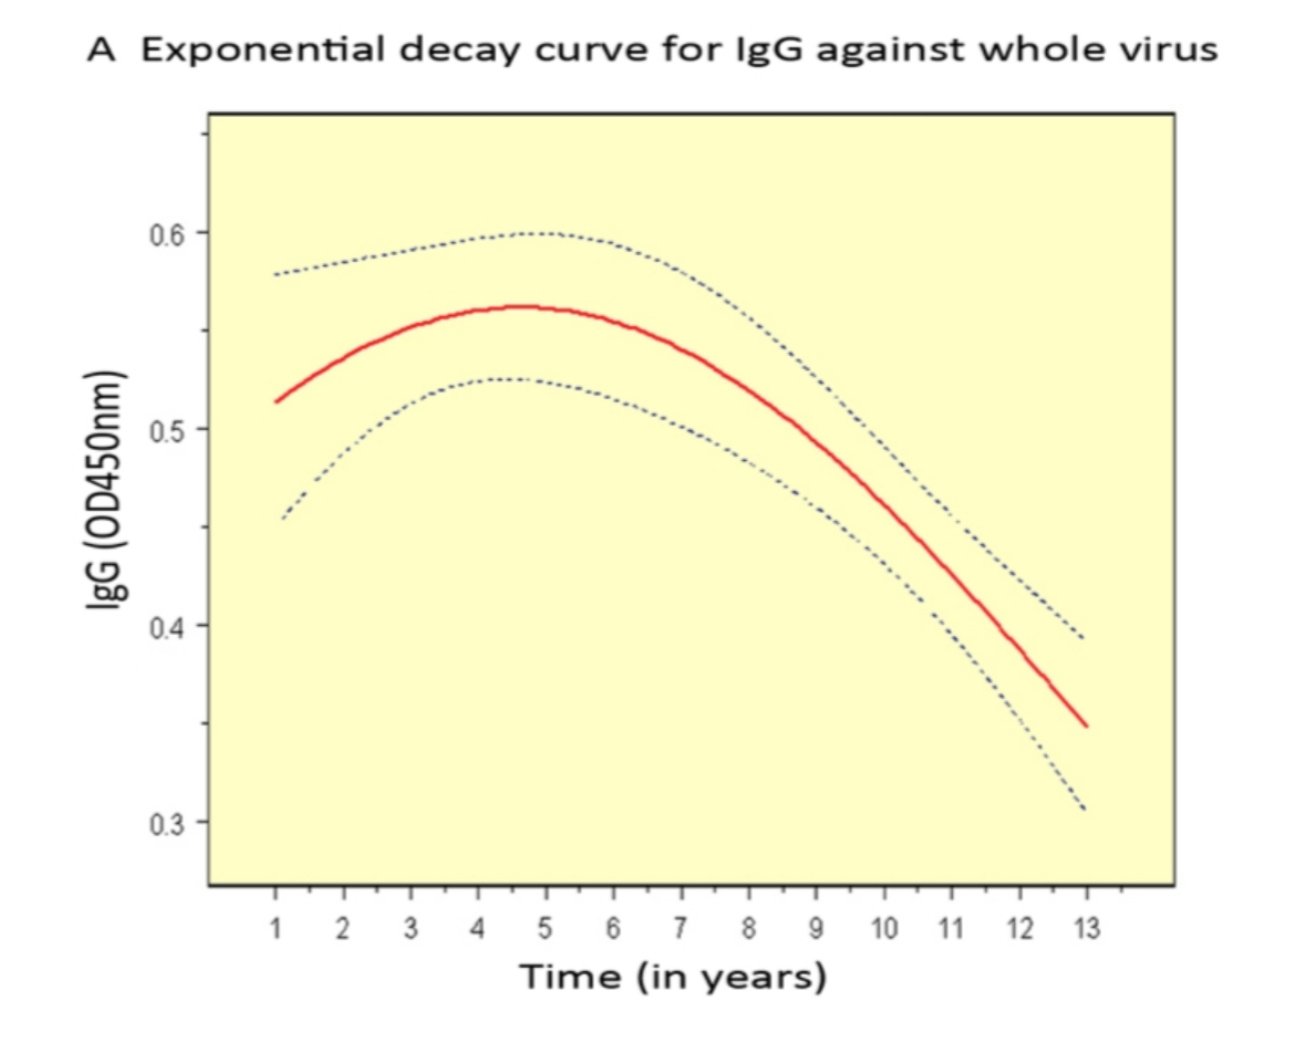 The exponential decay curve for IgG for SARS.